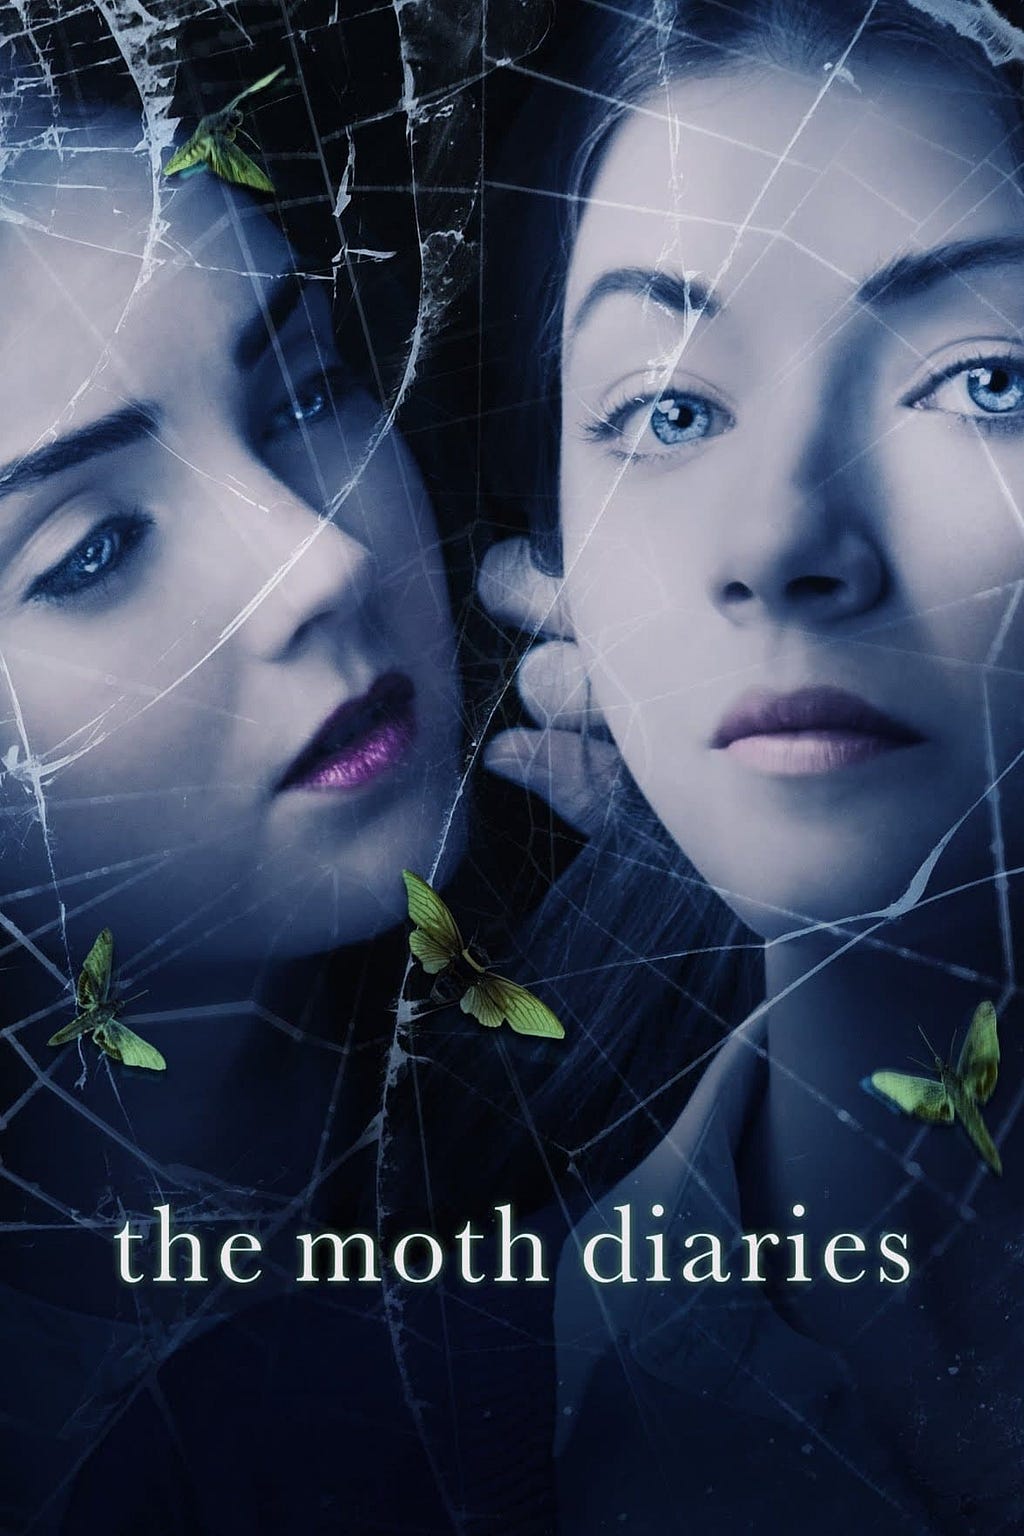 The Moth Diaries (2011) | Poster